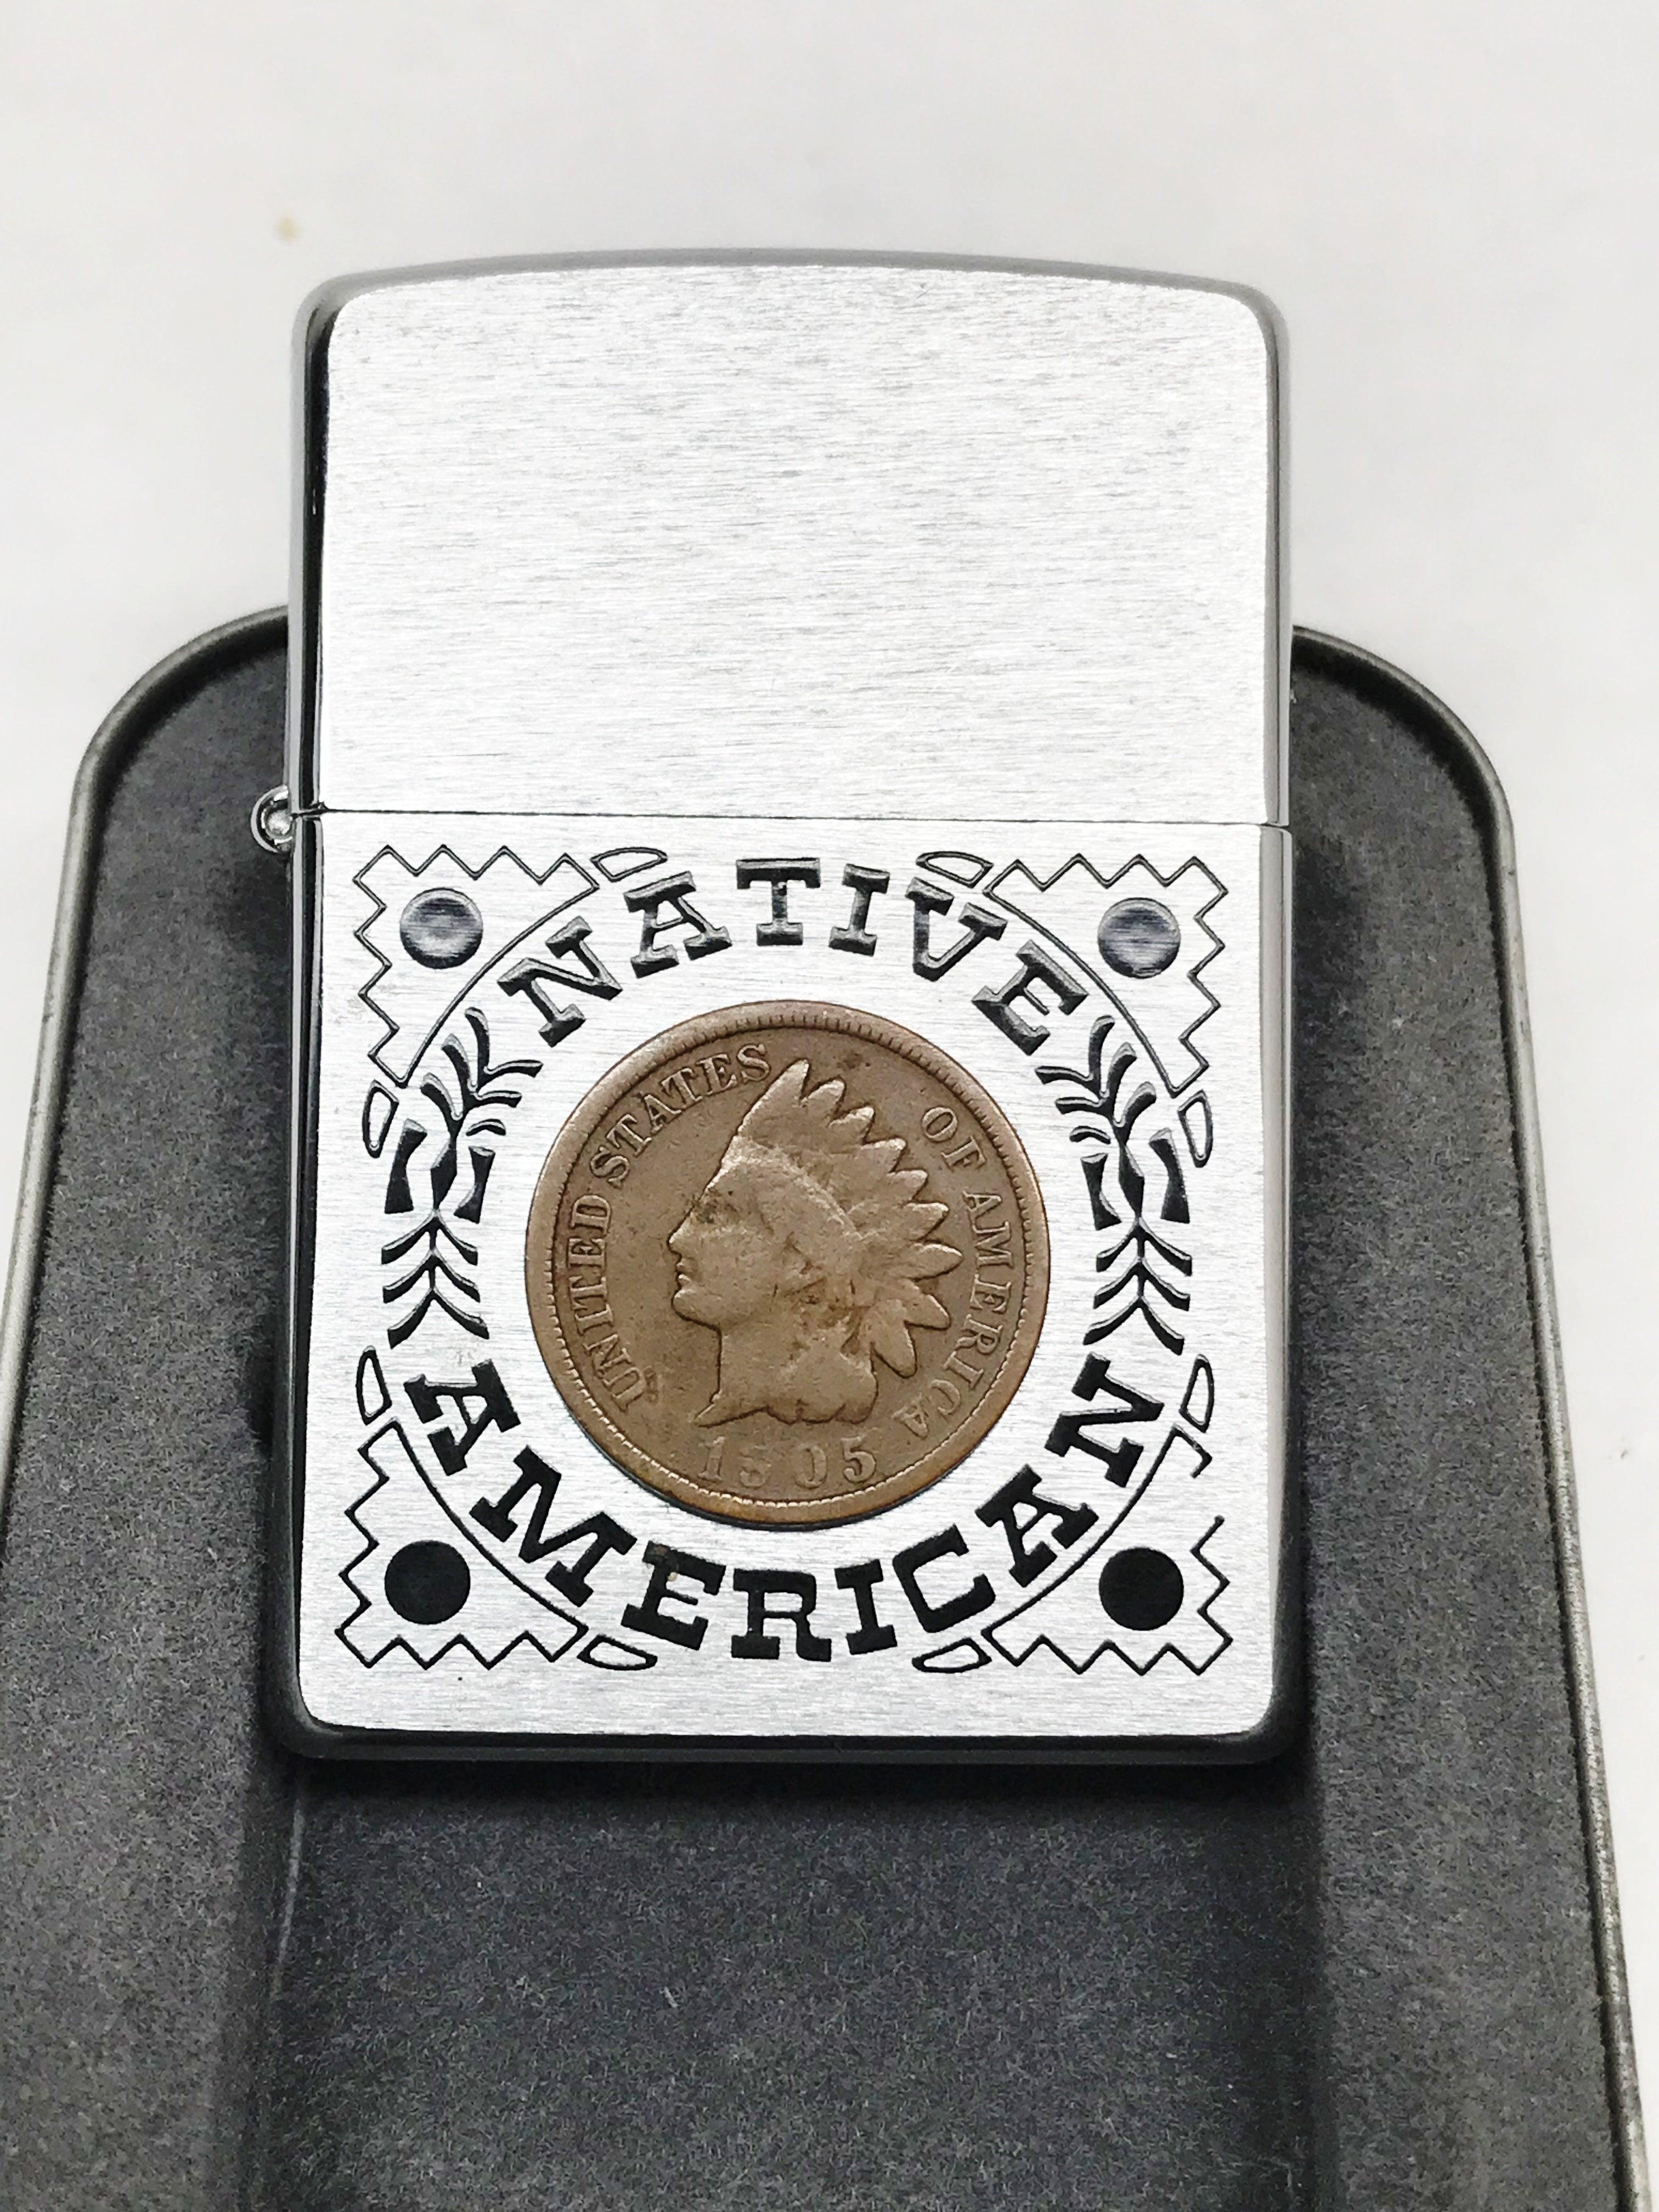 New XII 1996 Native American 1905 Indian Head Penny Zippo Lighter